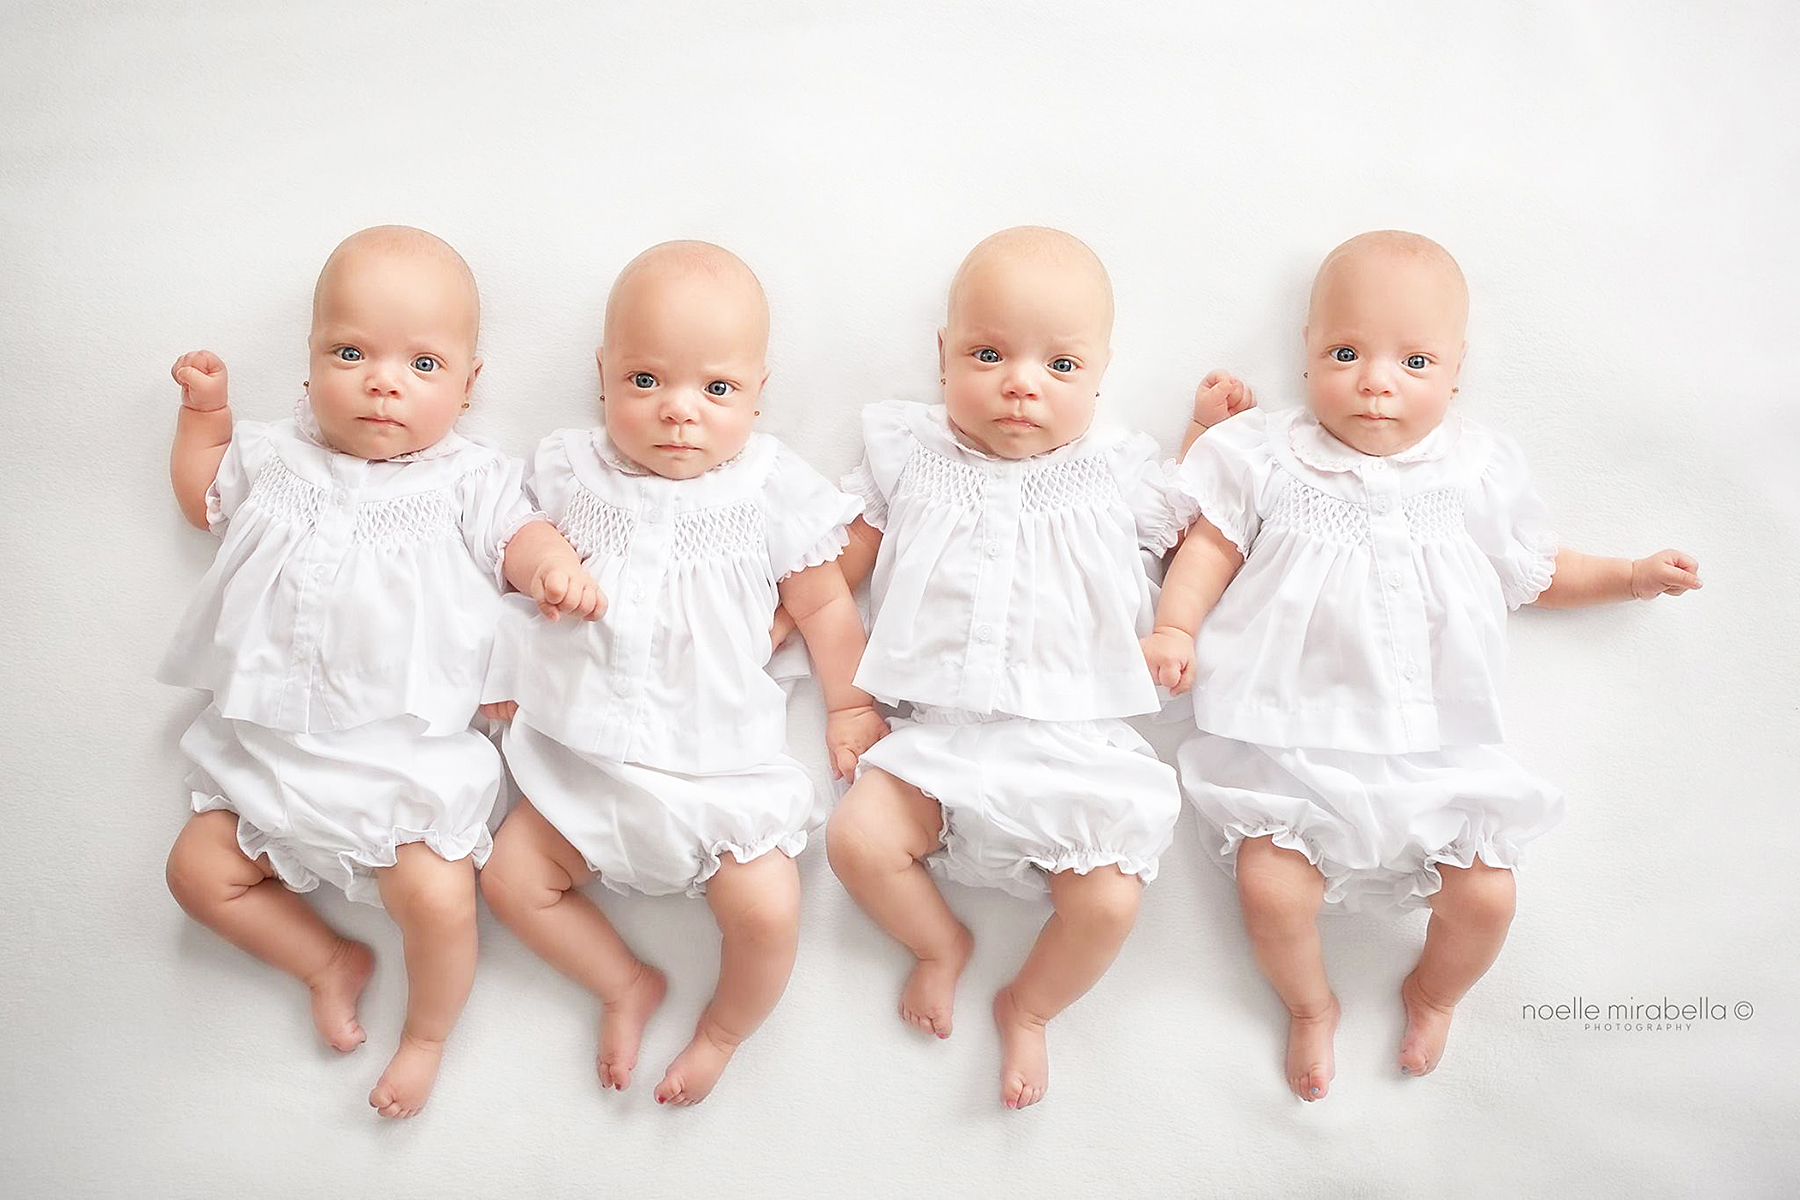 These Identical Quadruplet Baby Girls Are Growing Up Fast!